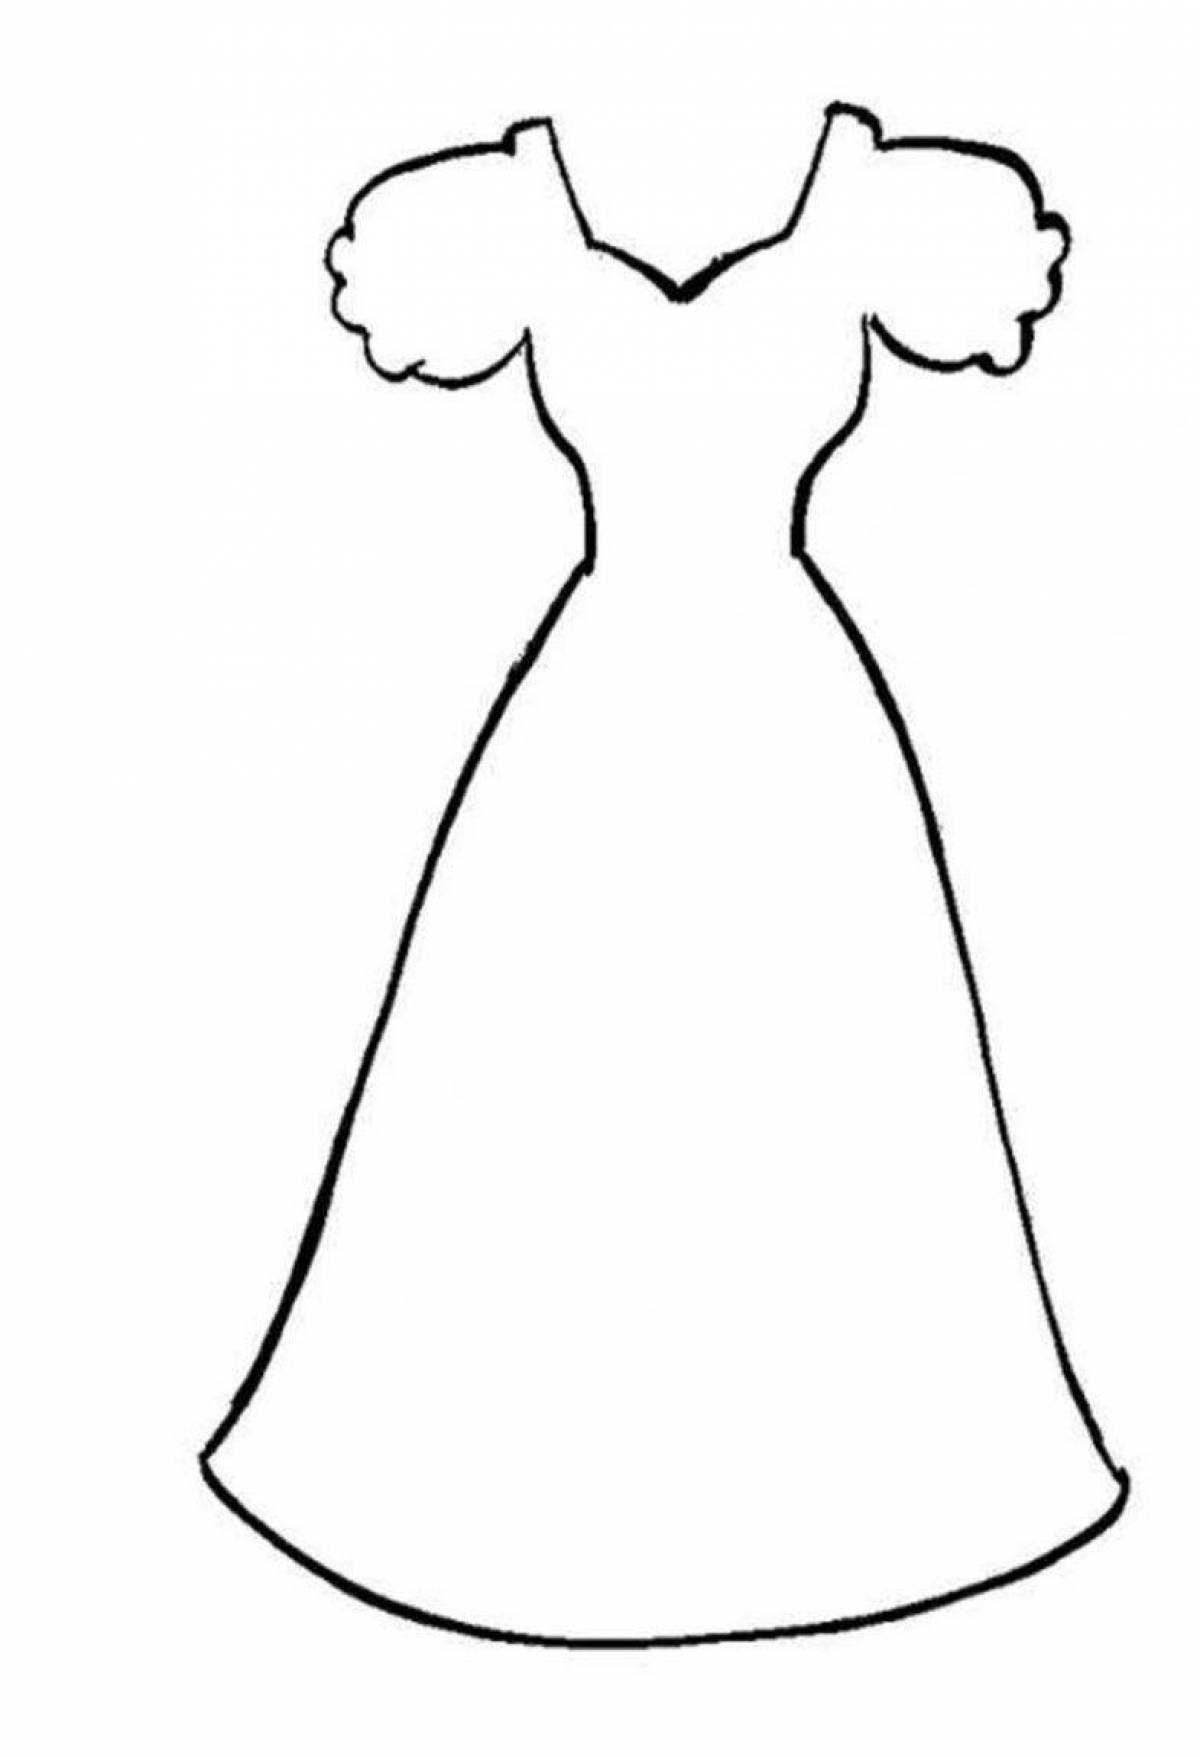 Coloring page graceful dress for a doll